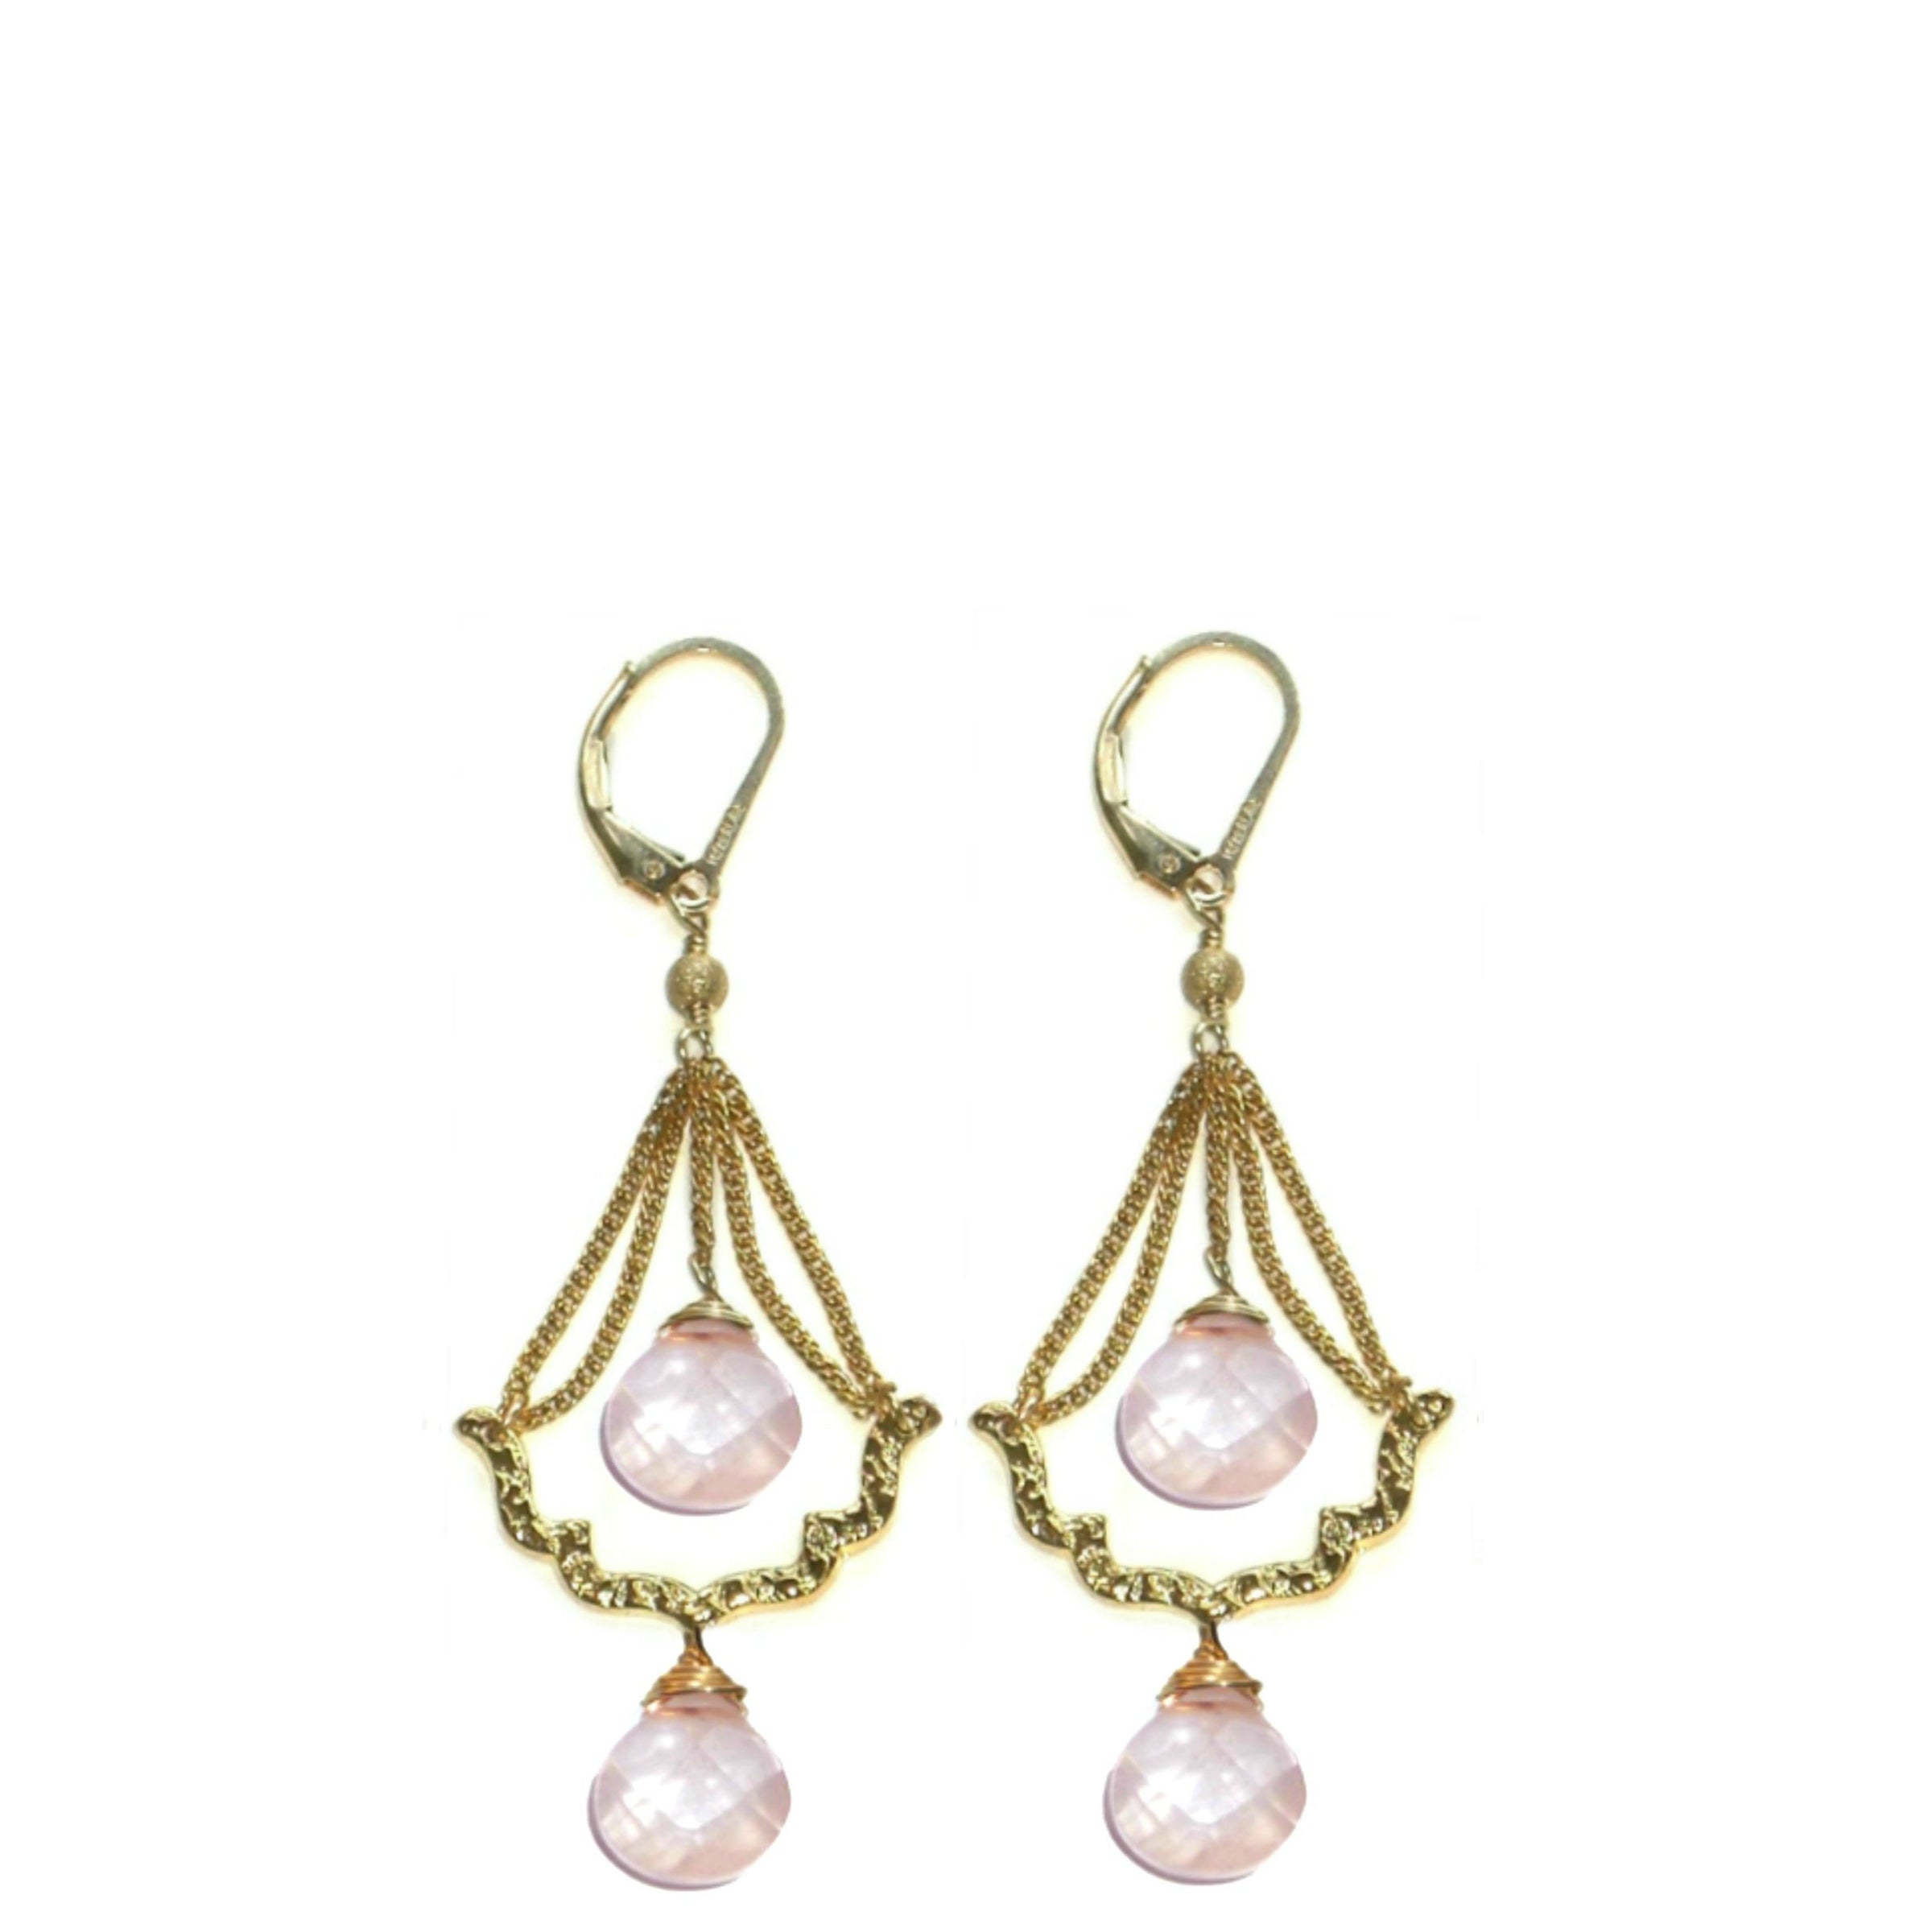 BISOU CHANDELIER EARRINGS ~ assorted stones in gold or silver